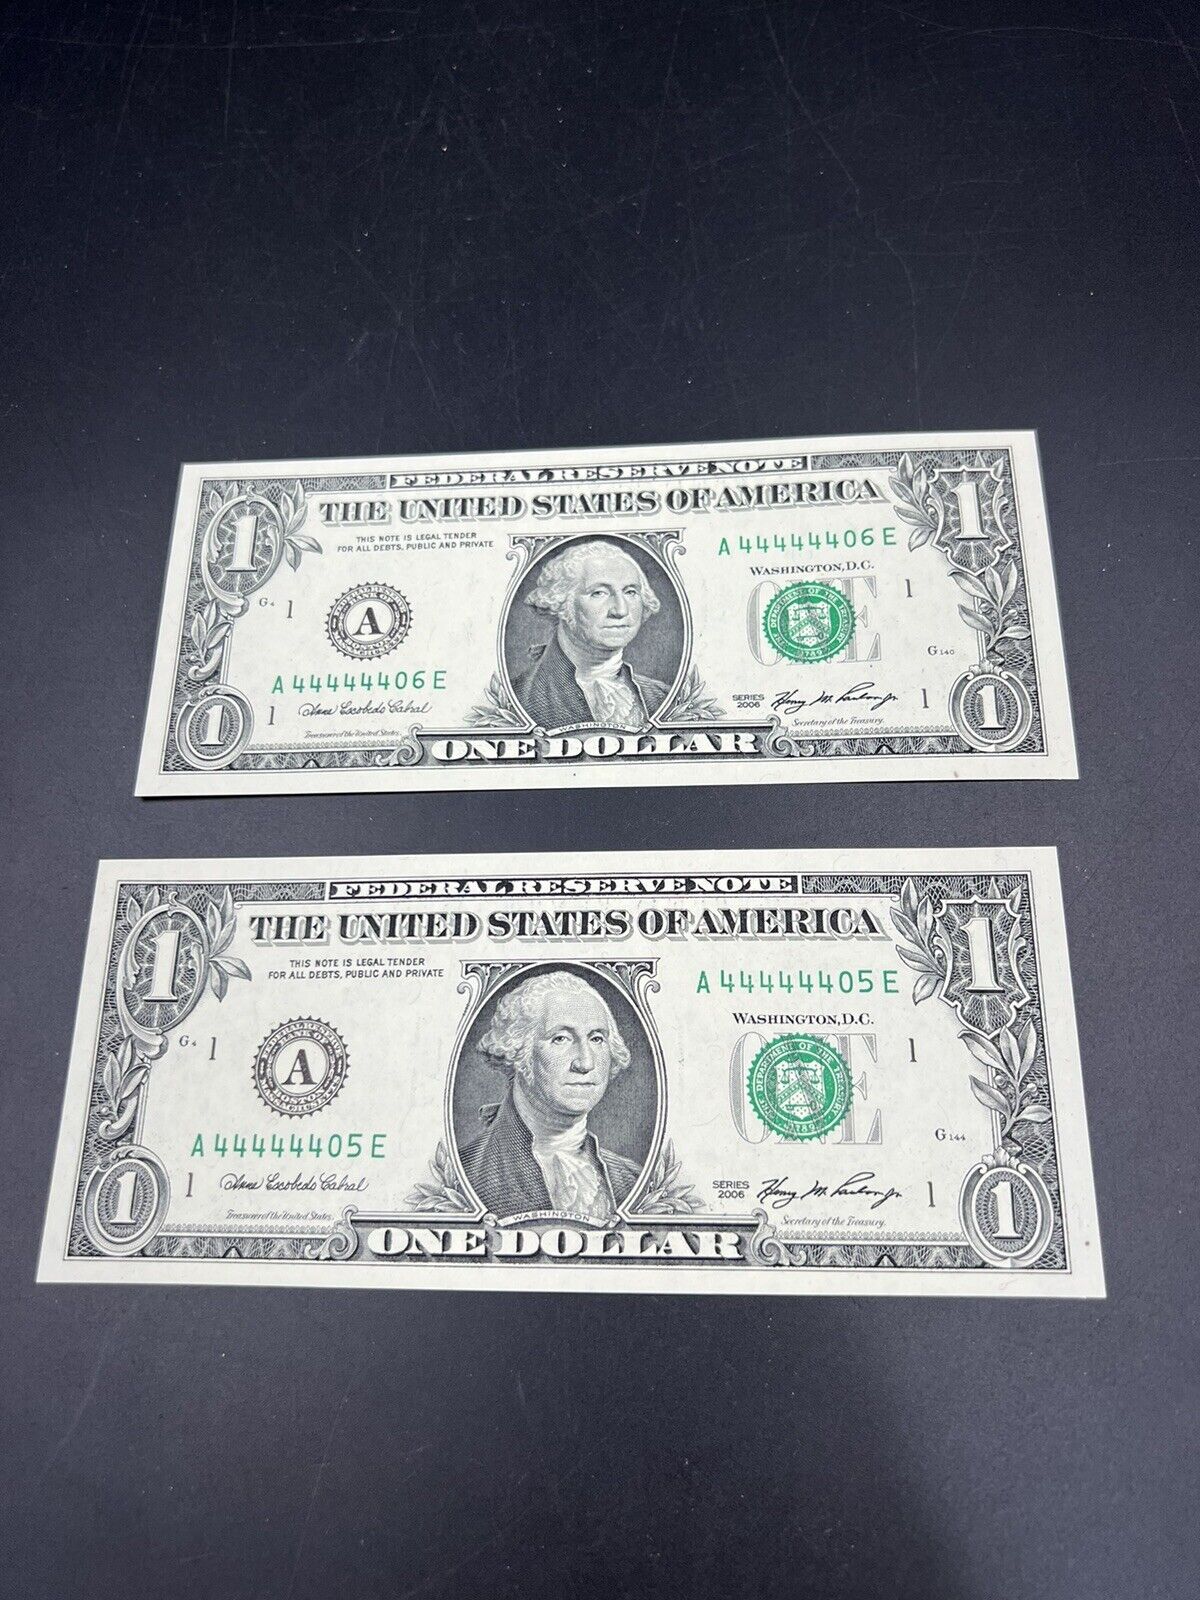 2 Consecutive 2006 $1 FRN SIXTUPLE REPEATER Serial Numbers 44444401-3 CH UNC